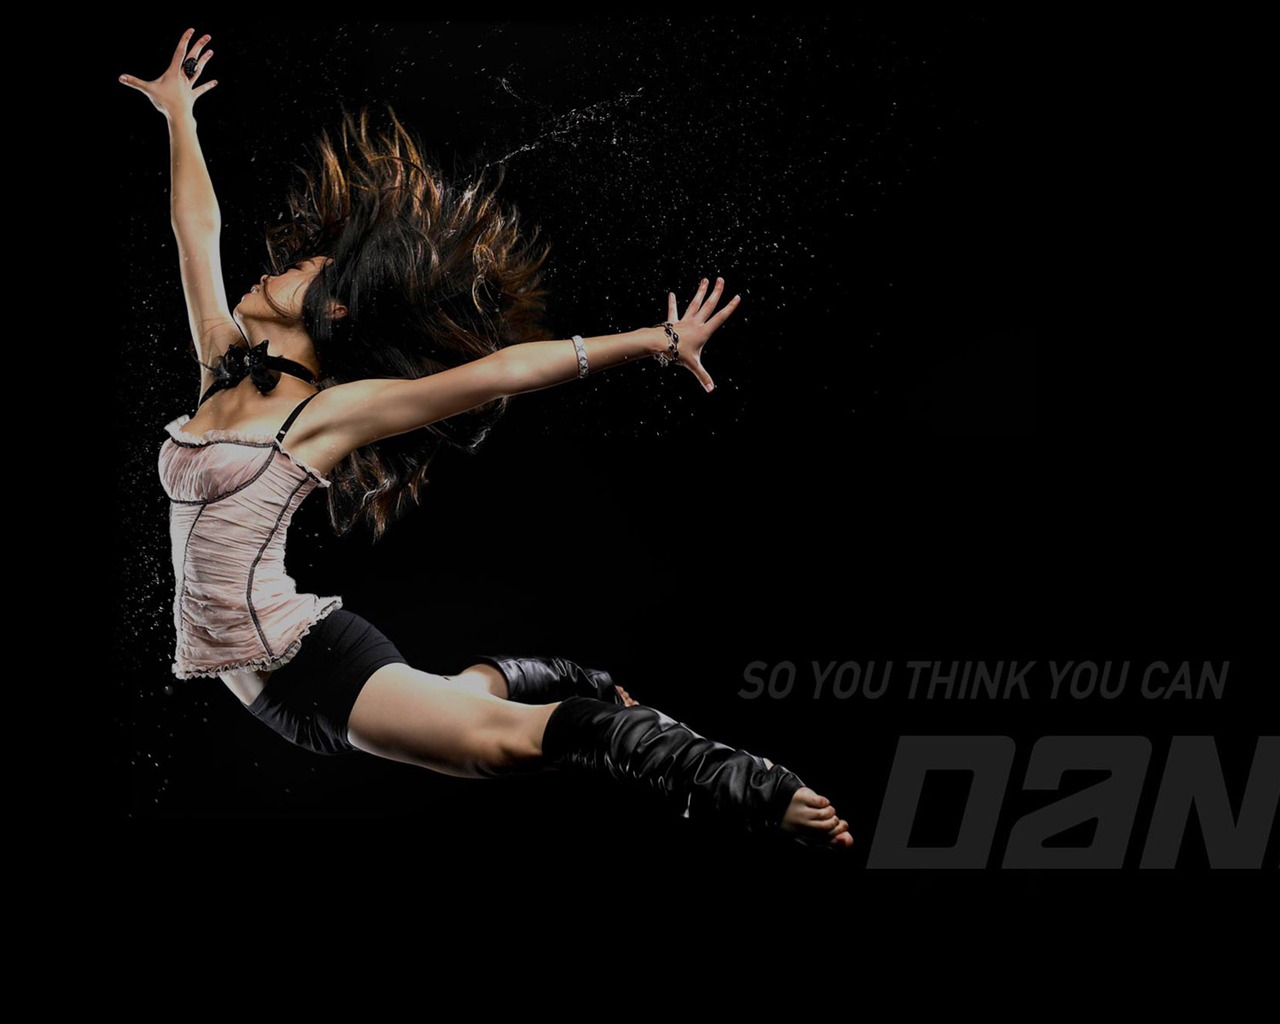 So You Think You Can Dance wallpaper (1) #1 - 1280x1024